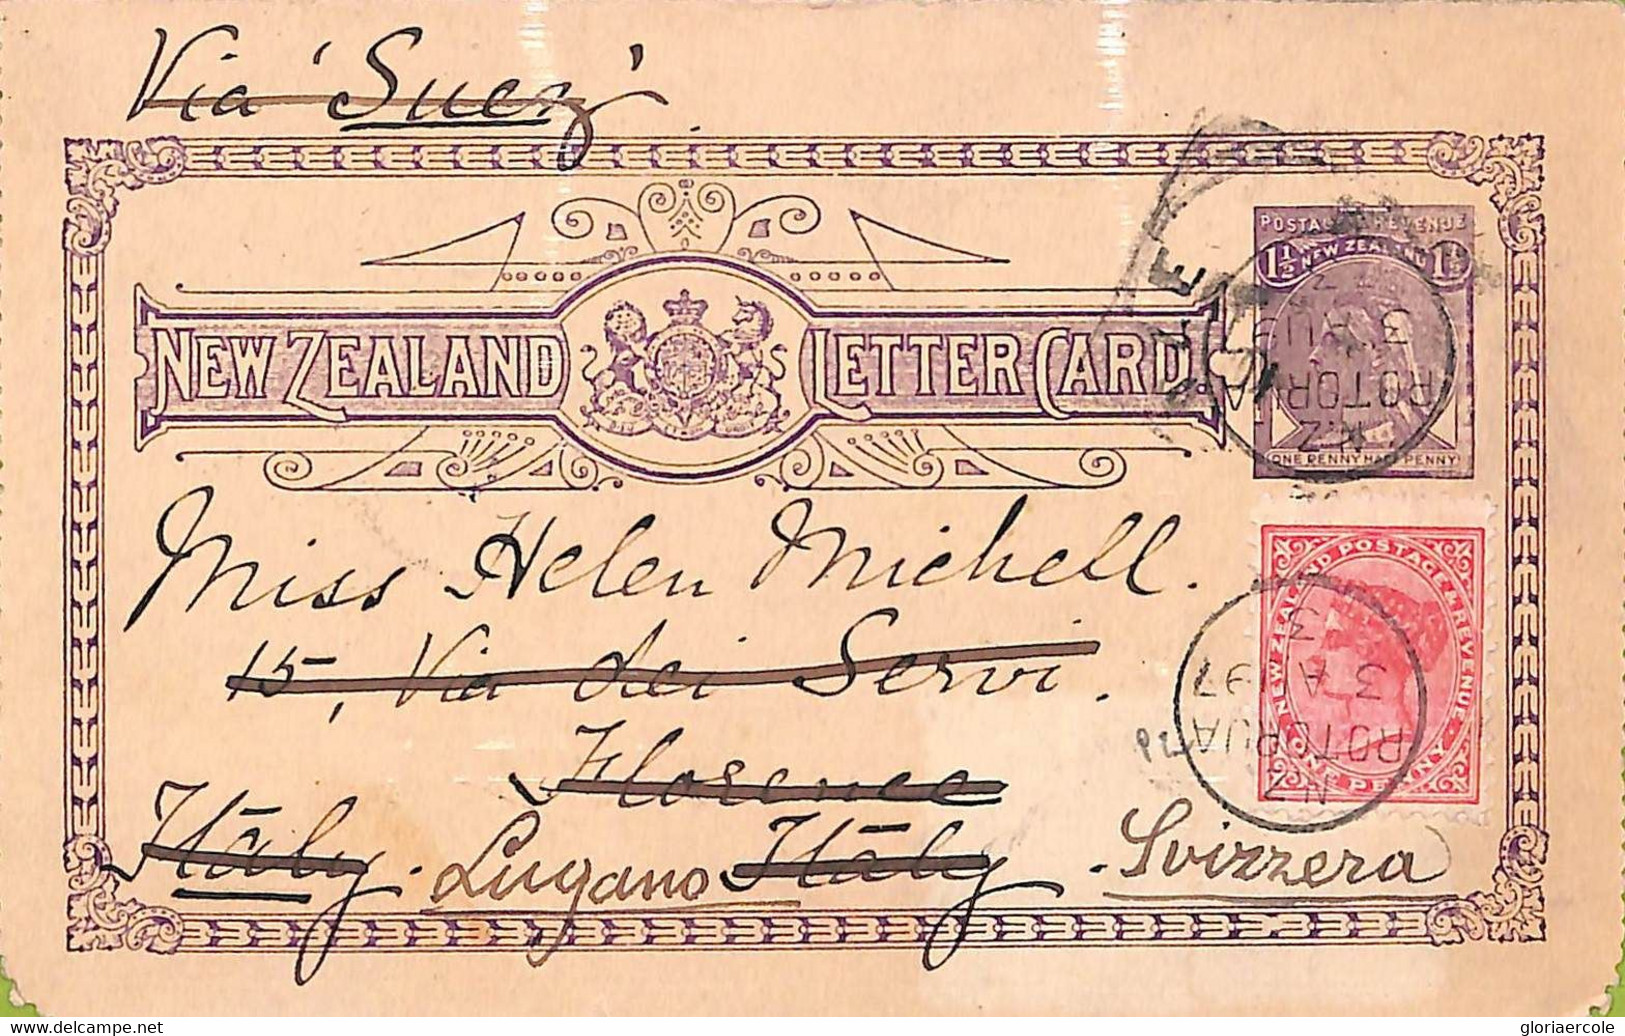 Ac6686 - NEW ZEALAND - POSTAL HISTORY - STATIONERY Letter Card To ITALY 1897 - Storia Postale